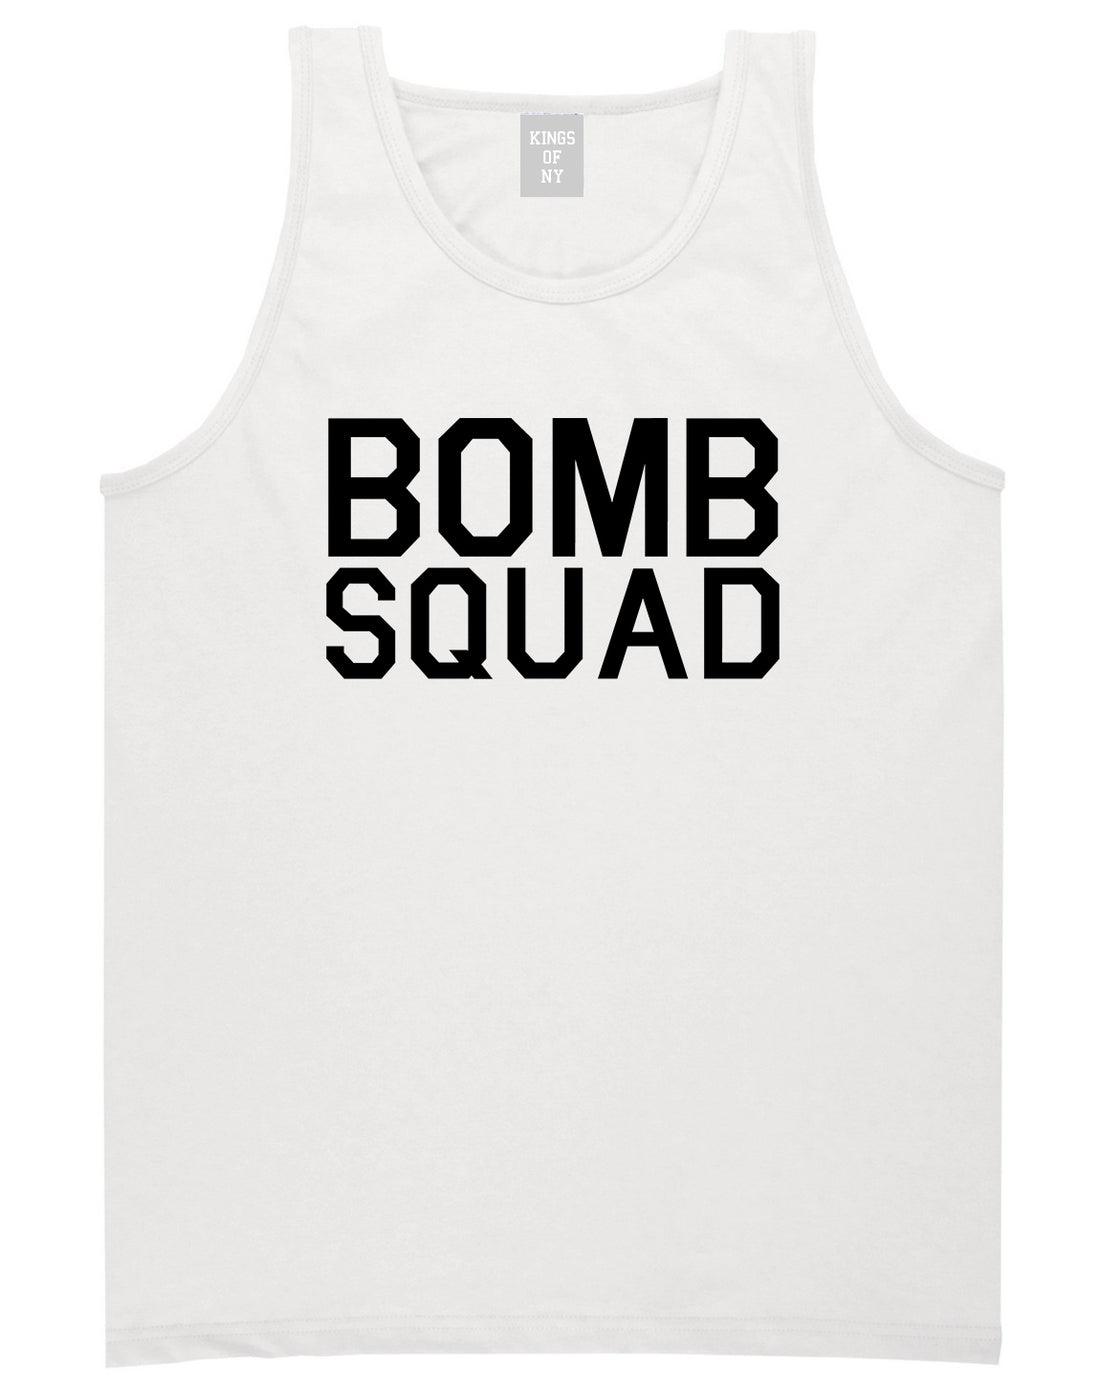 Bomb Squad White Tank Top Shirt by Kings Of NY